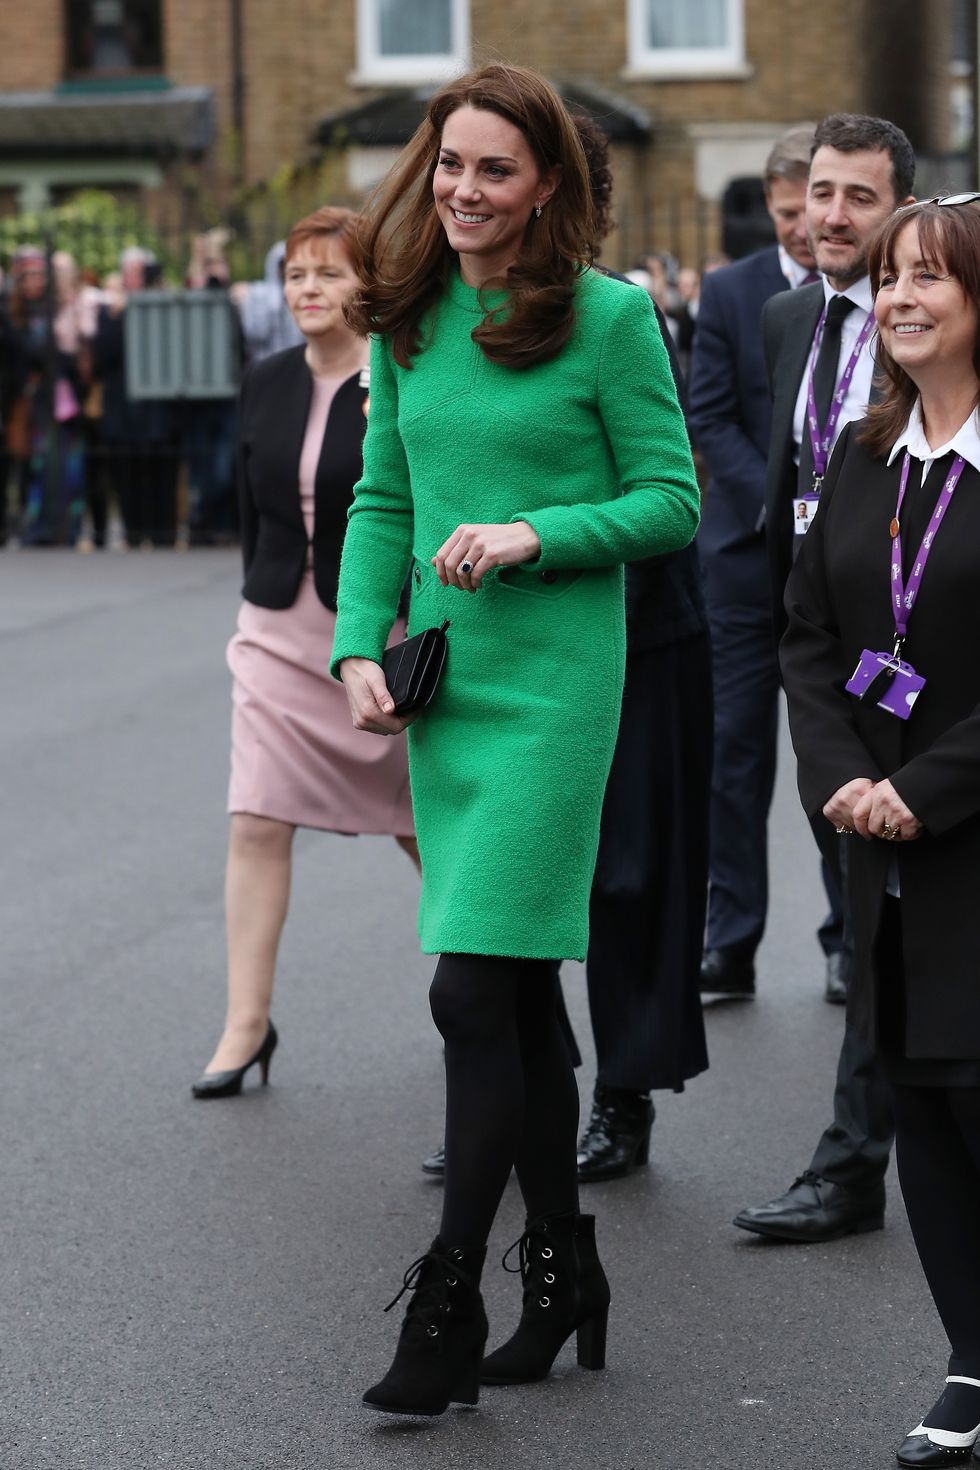 The Duchess Of Cambridge Visits Schools In Support Of Children's Mental Health